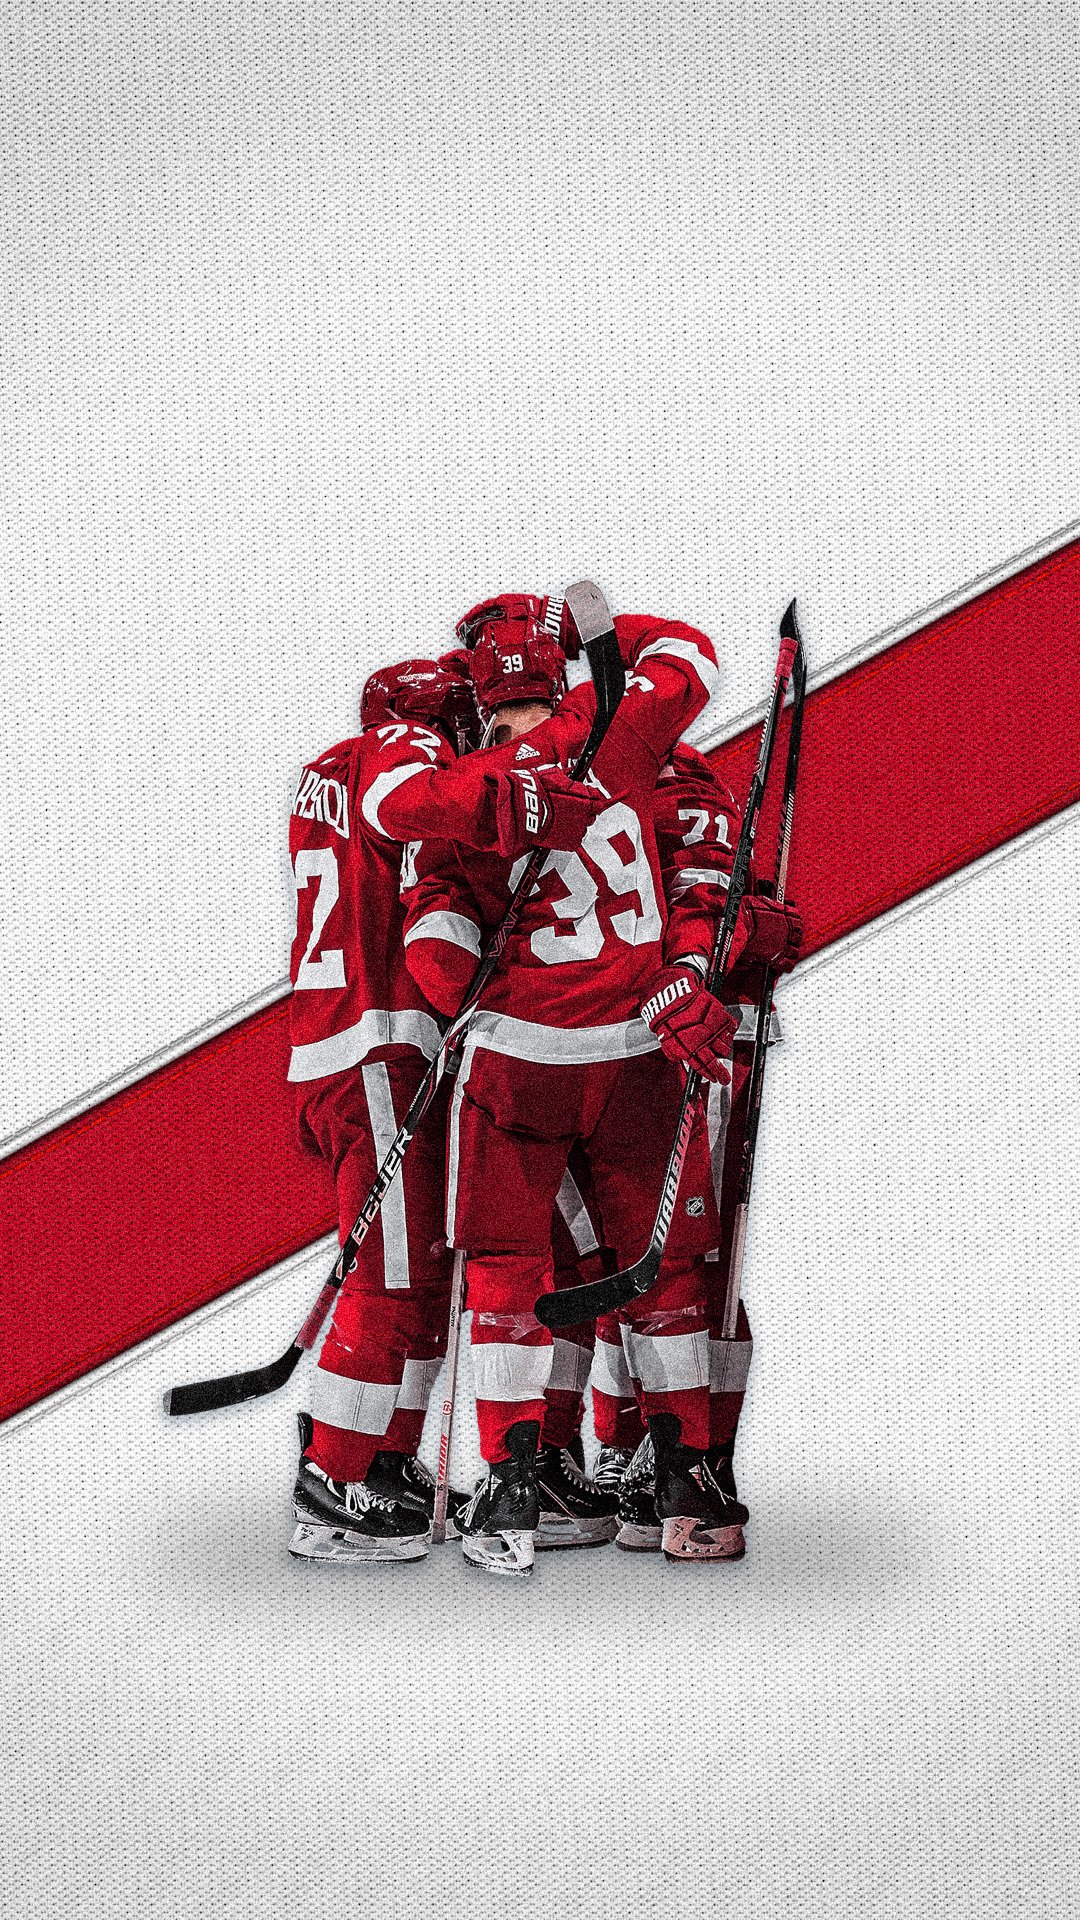 Detroit Red Wings on "Wednesday's are for new wallpapers. 🤩 #WallpaperWednesday | #LGRW / Twitter